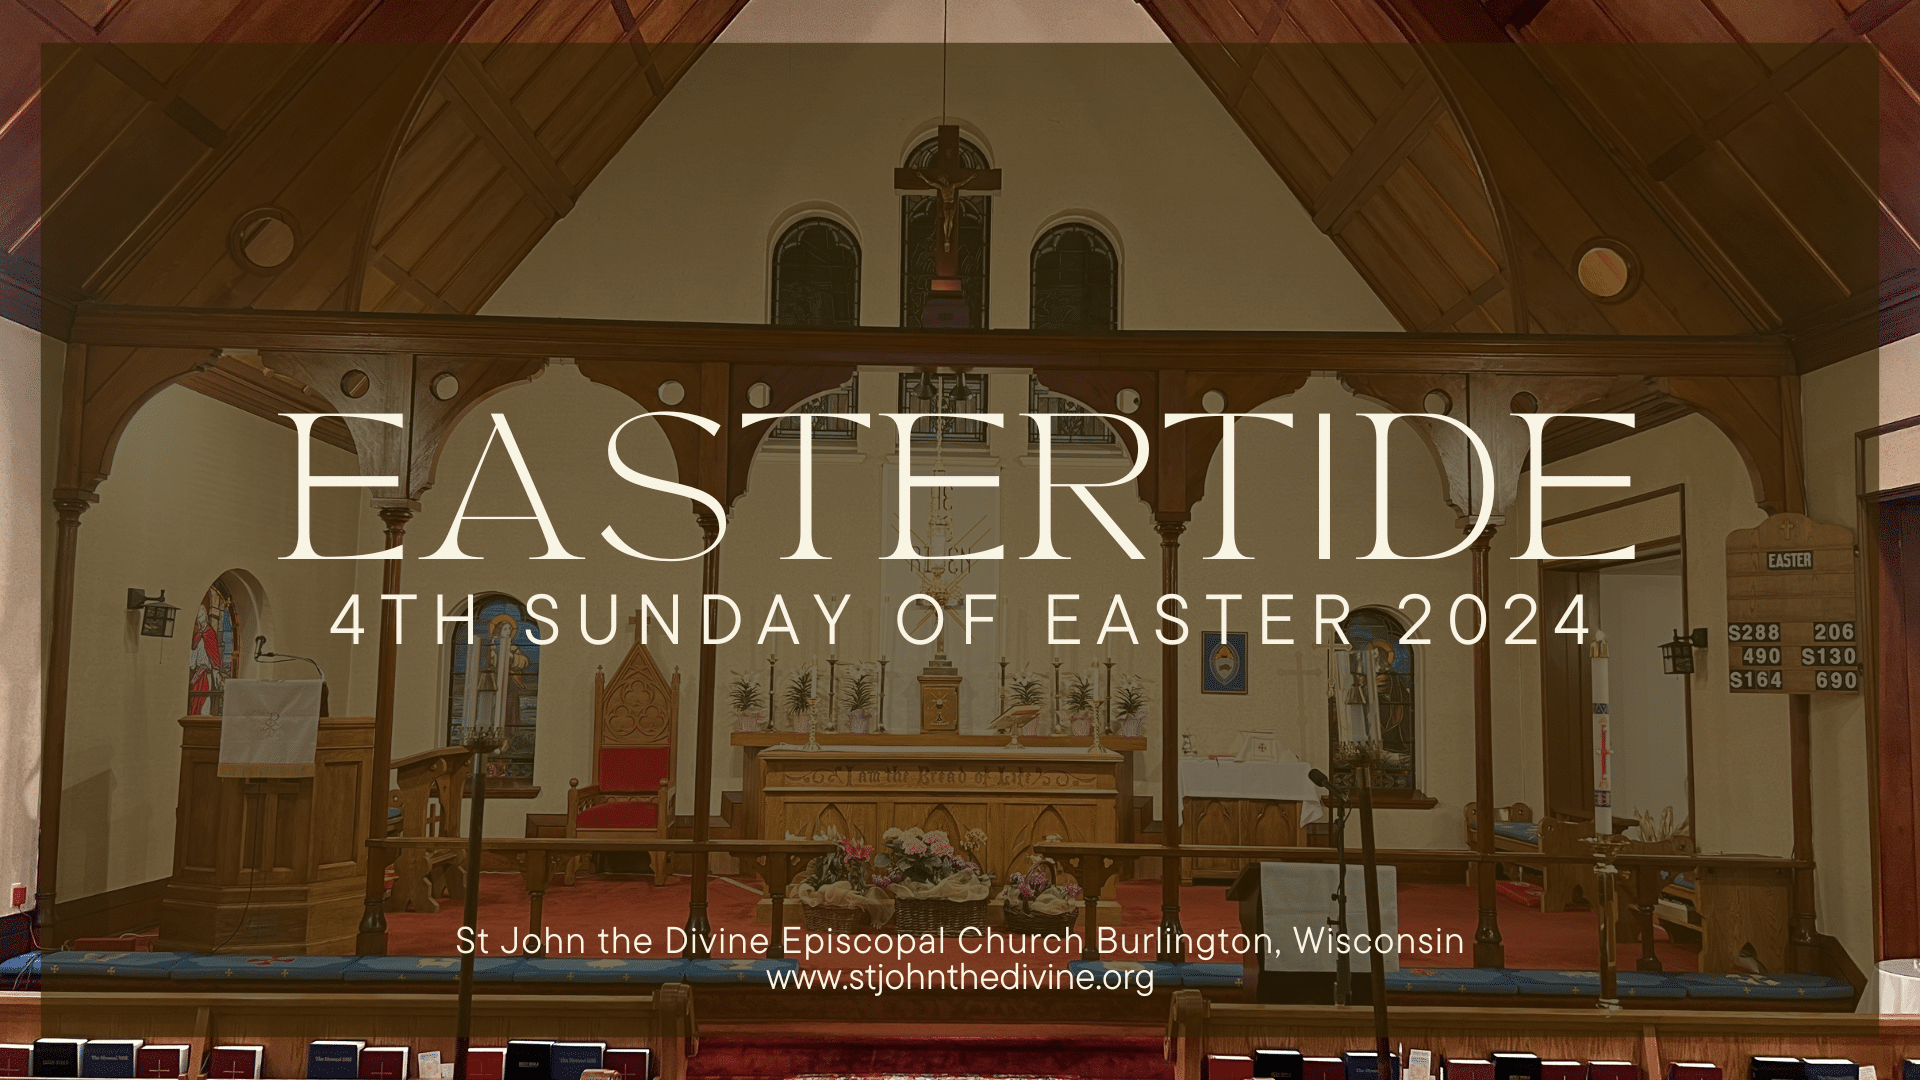 4th Sunday of Easter 2024